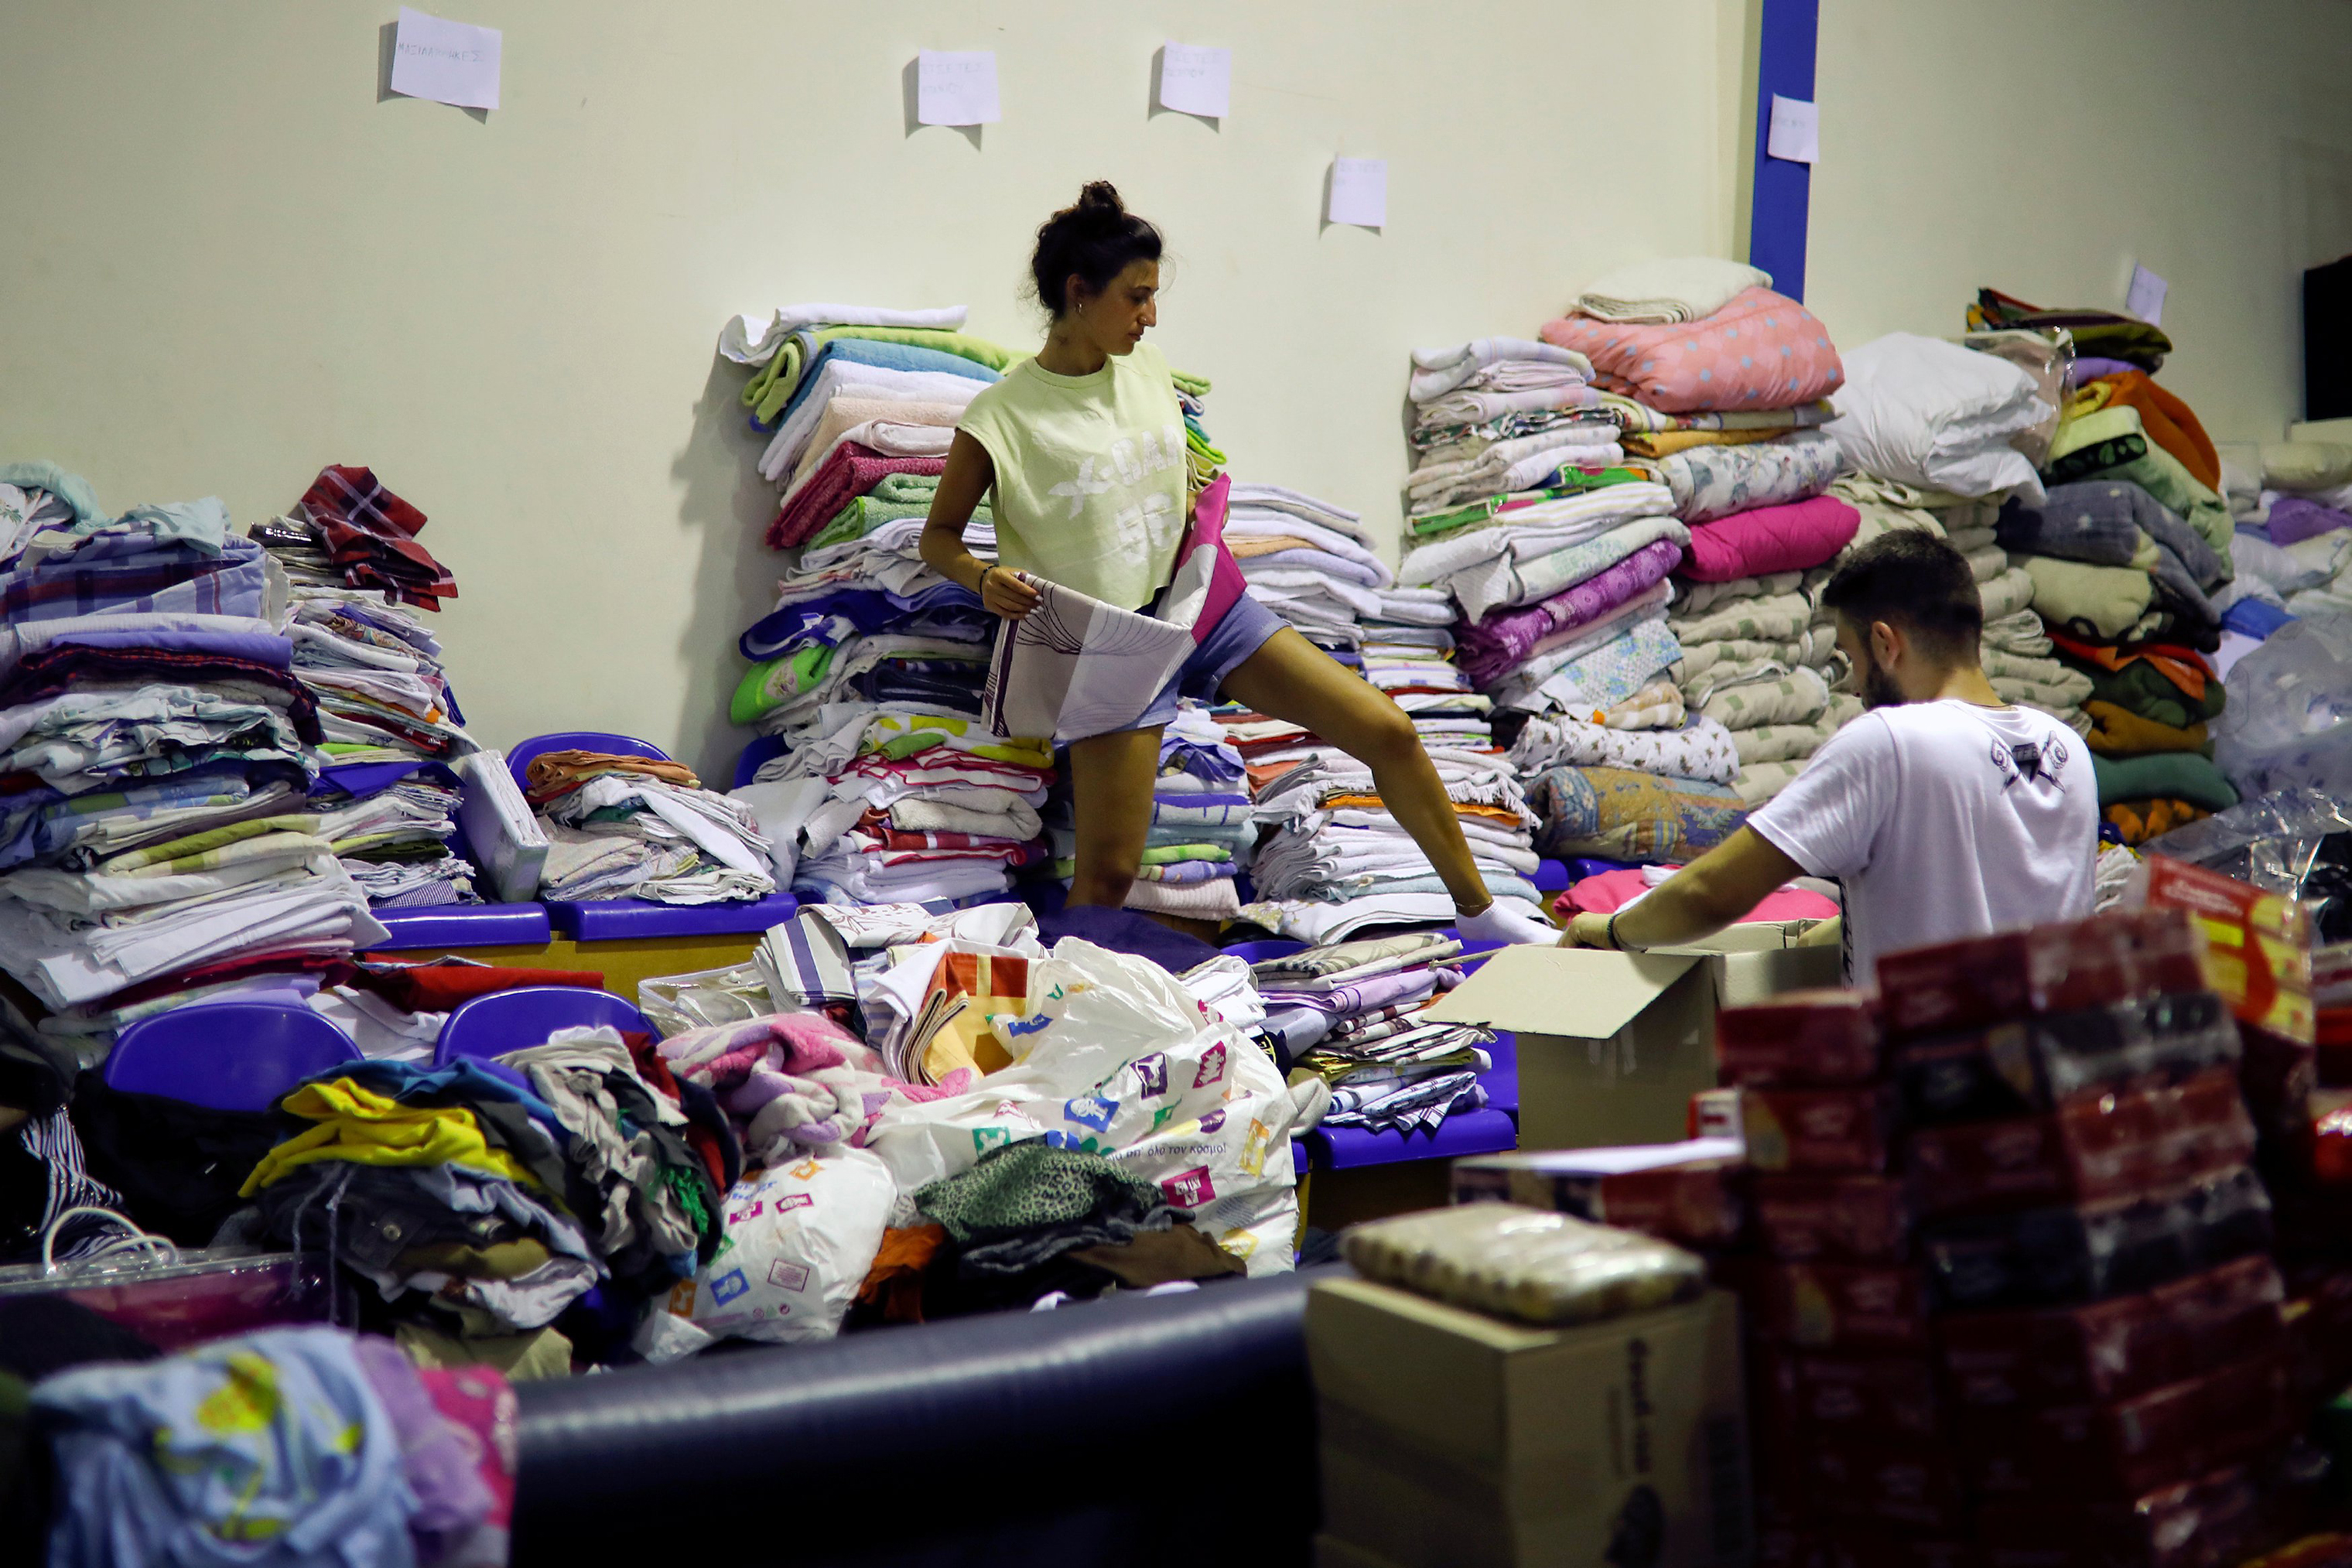 A volunteer arranges clothes for residents in Nea Makri, near Athens on July 25, 2018. (Alkis Konstantinidis—Reuters)